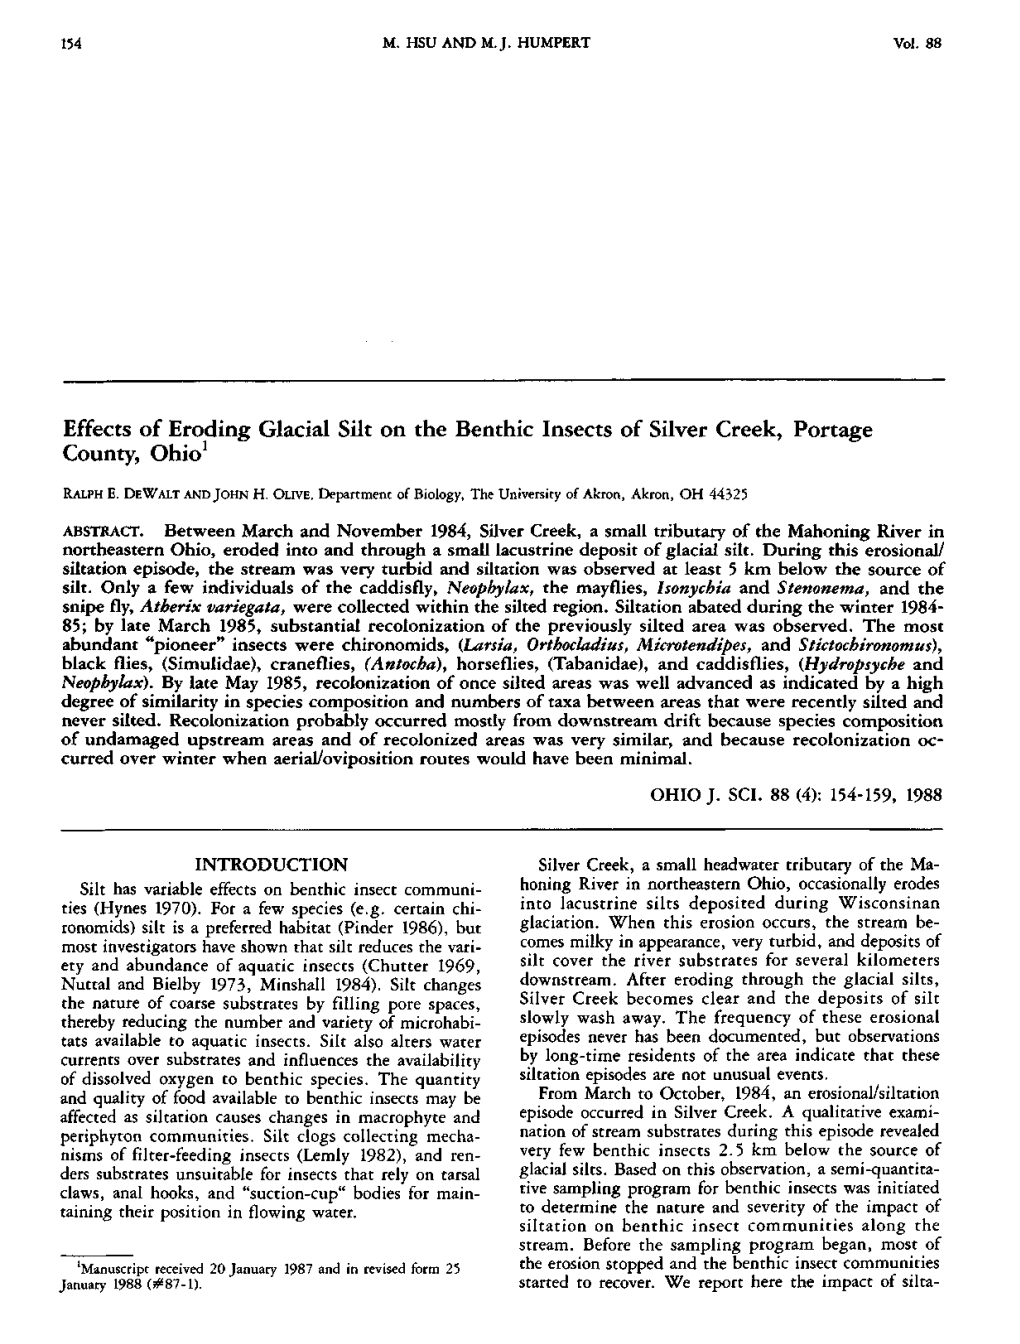 Effects of Eroding Glacial Silt on the Benthic Insects of Silver Creek, Portage County, Ohio1